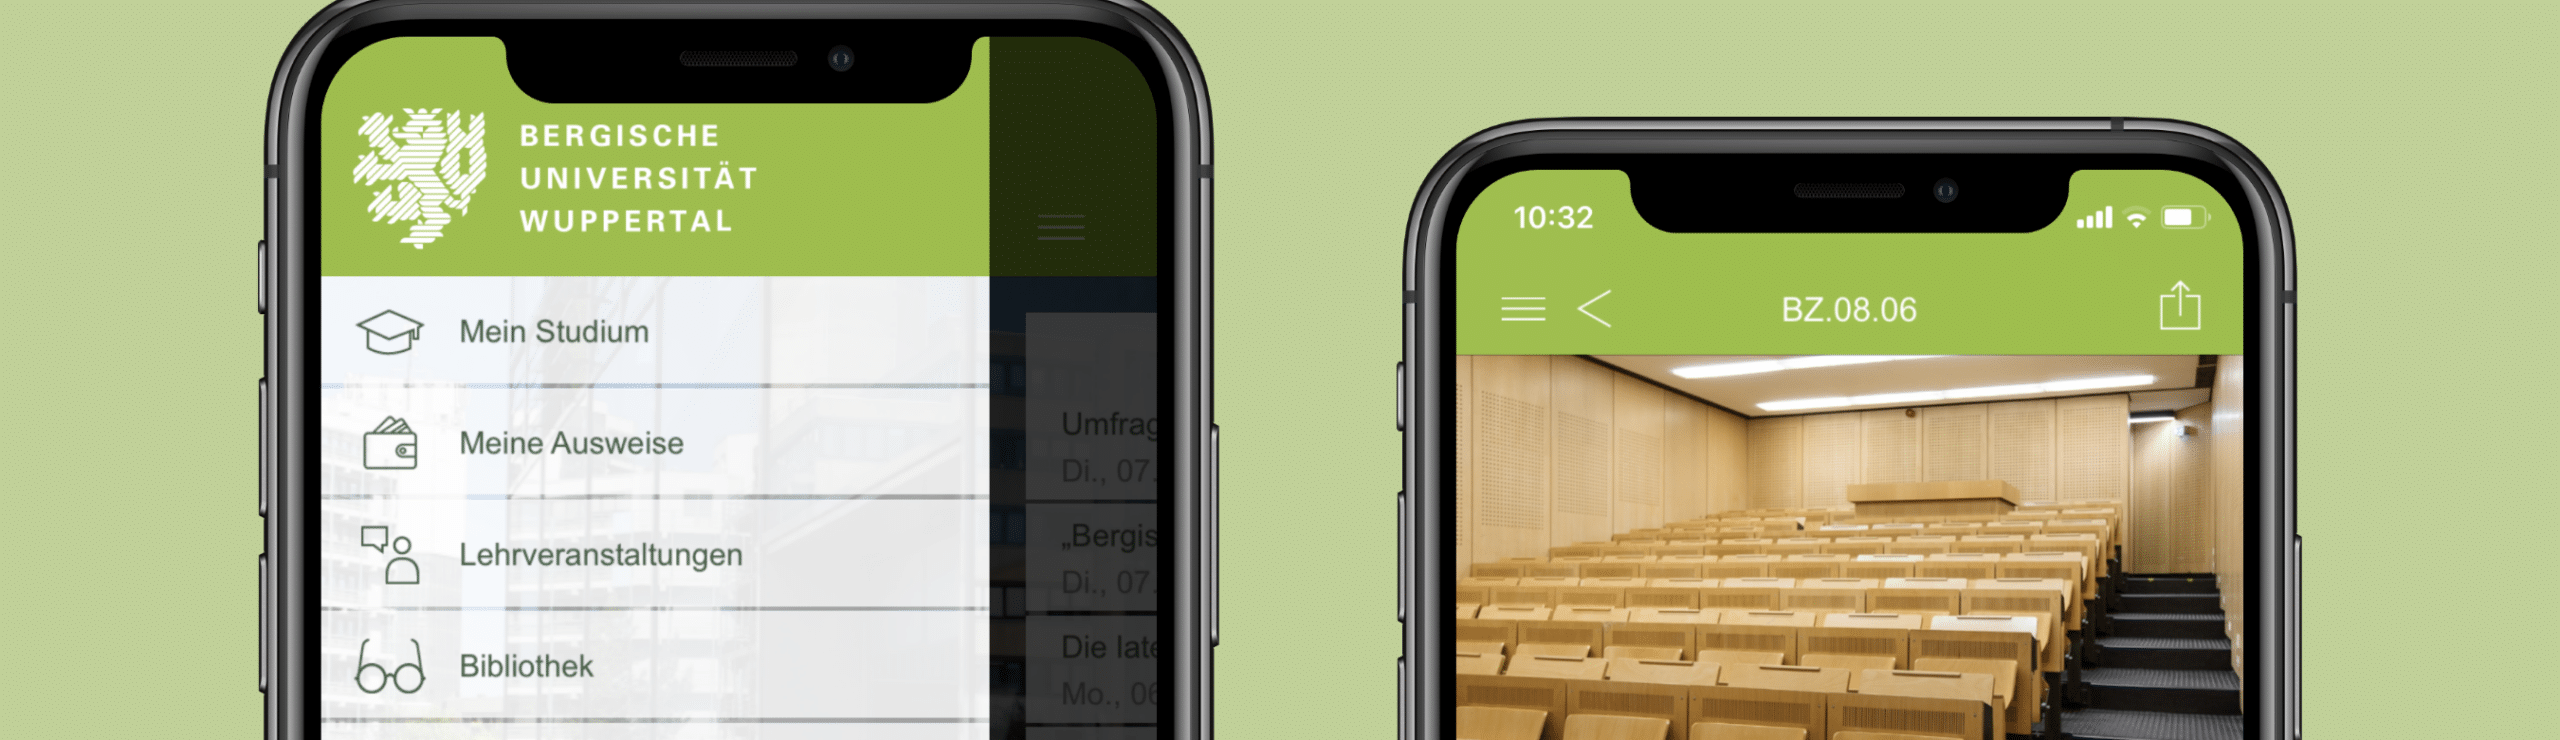 University of Wuppertal: Campus App